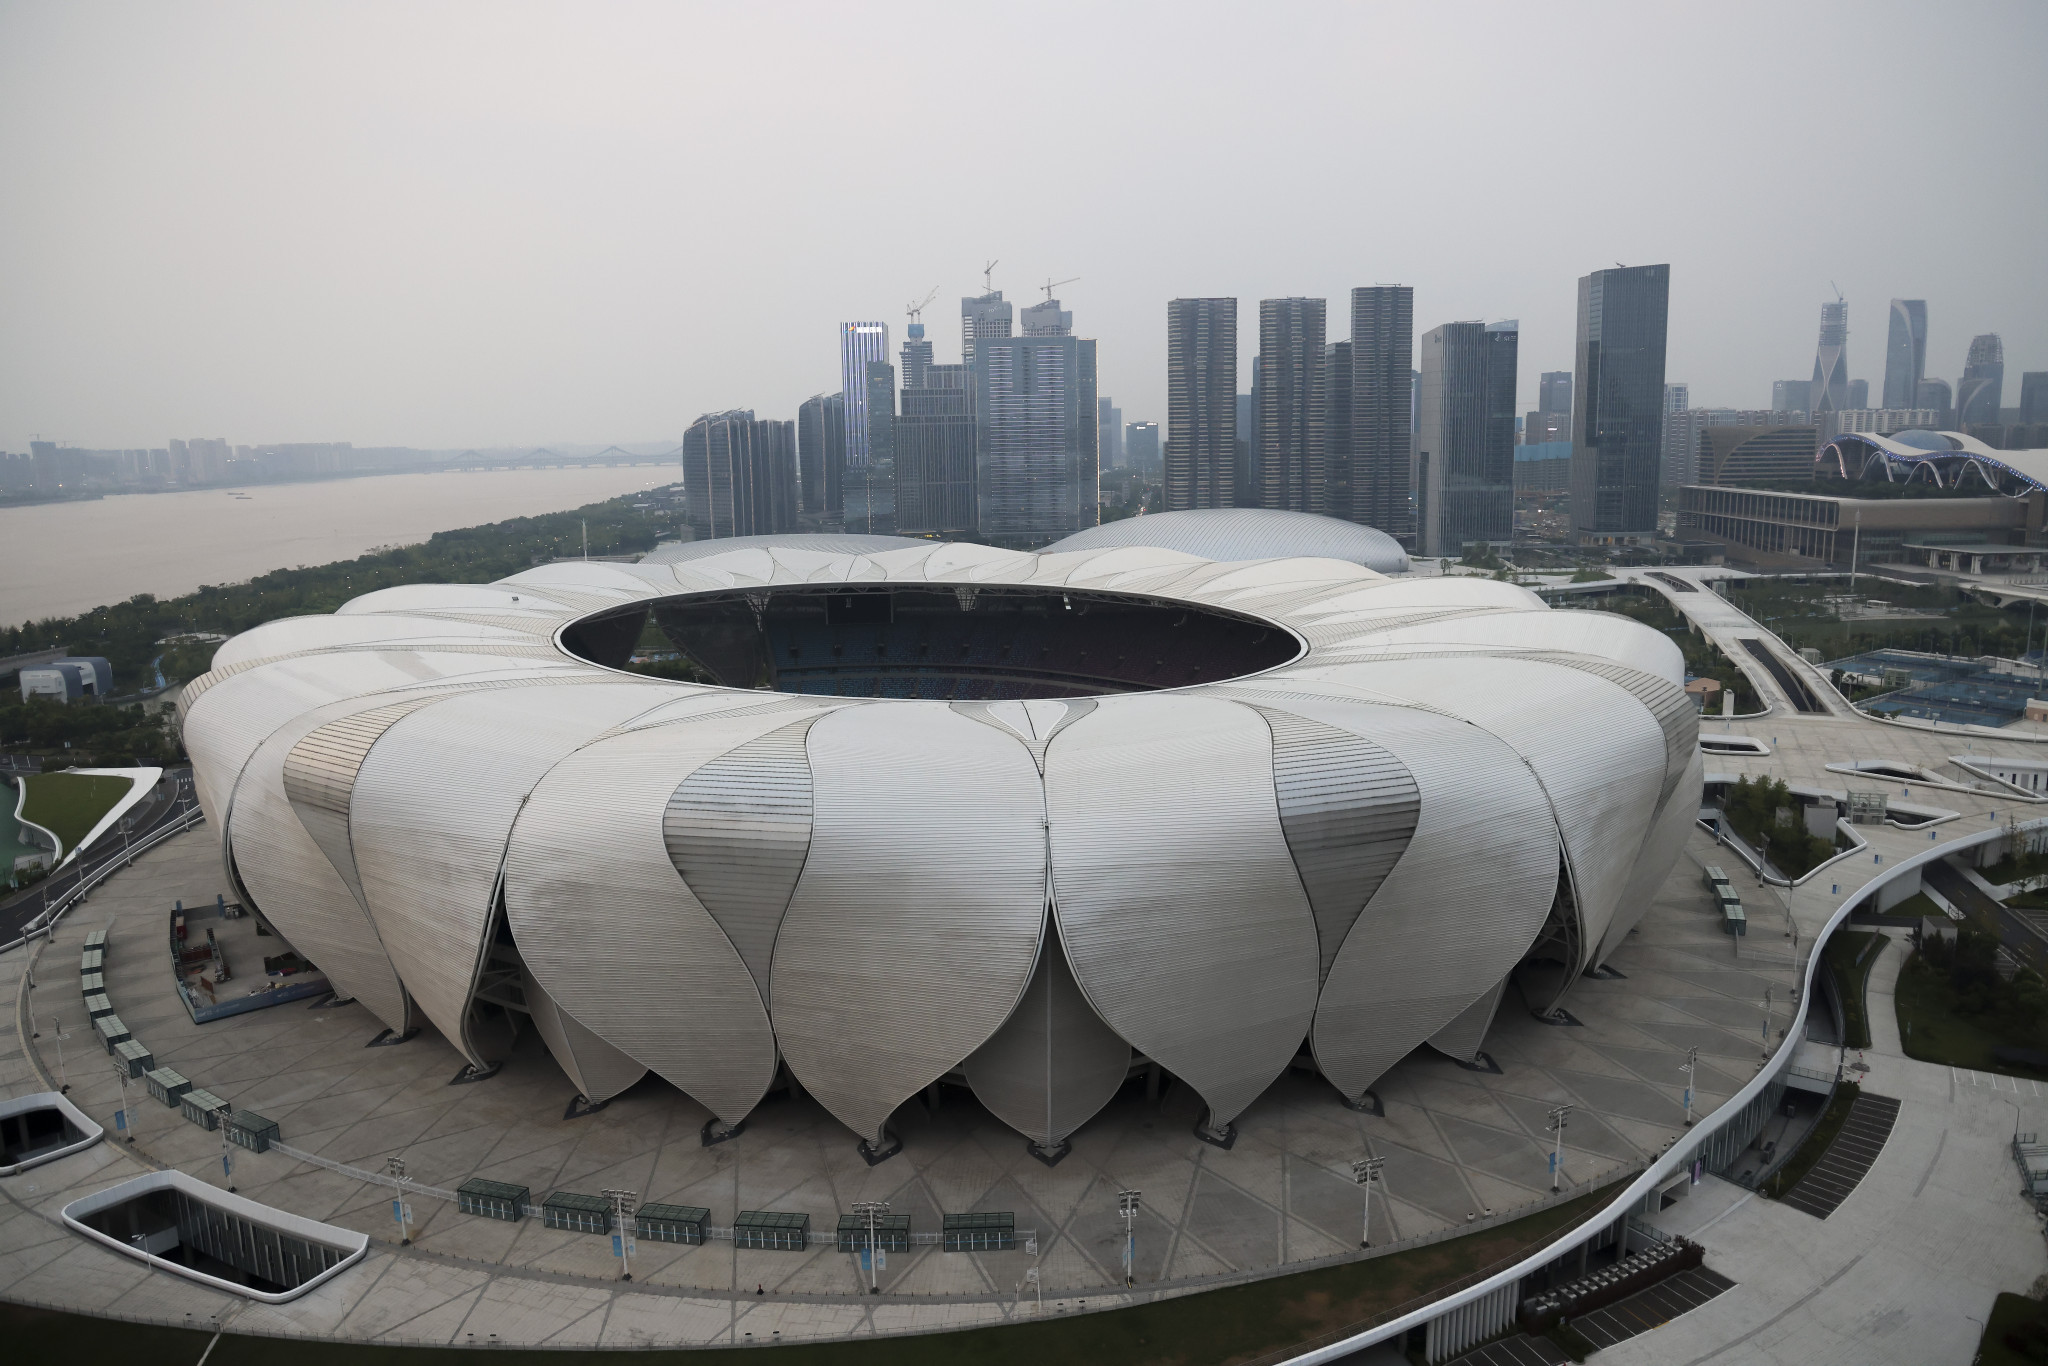 The Hangzhou 2022 Opening Ceremony on September 23 is set to last two hours, Chinese officials have announced ©Getty Images